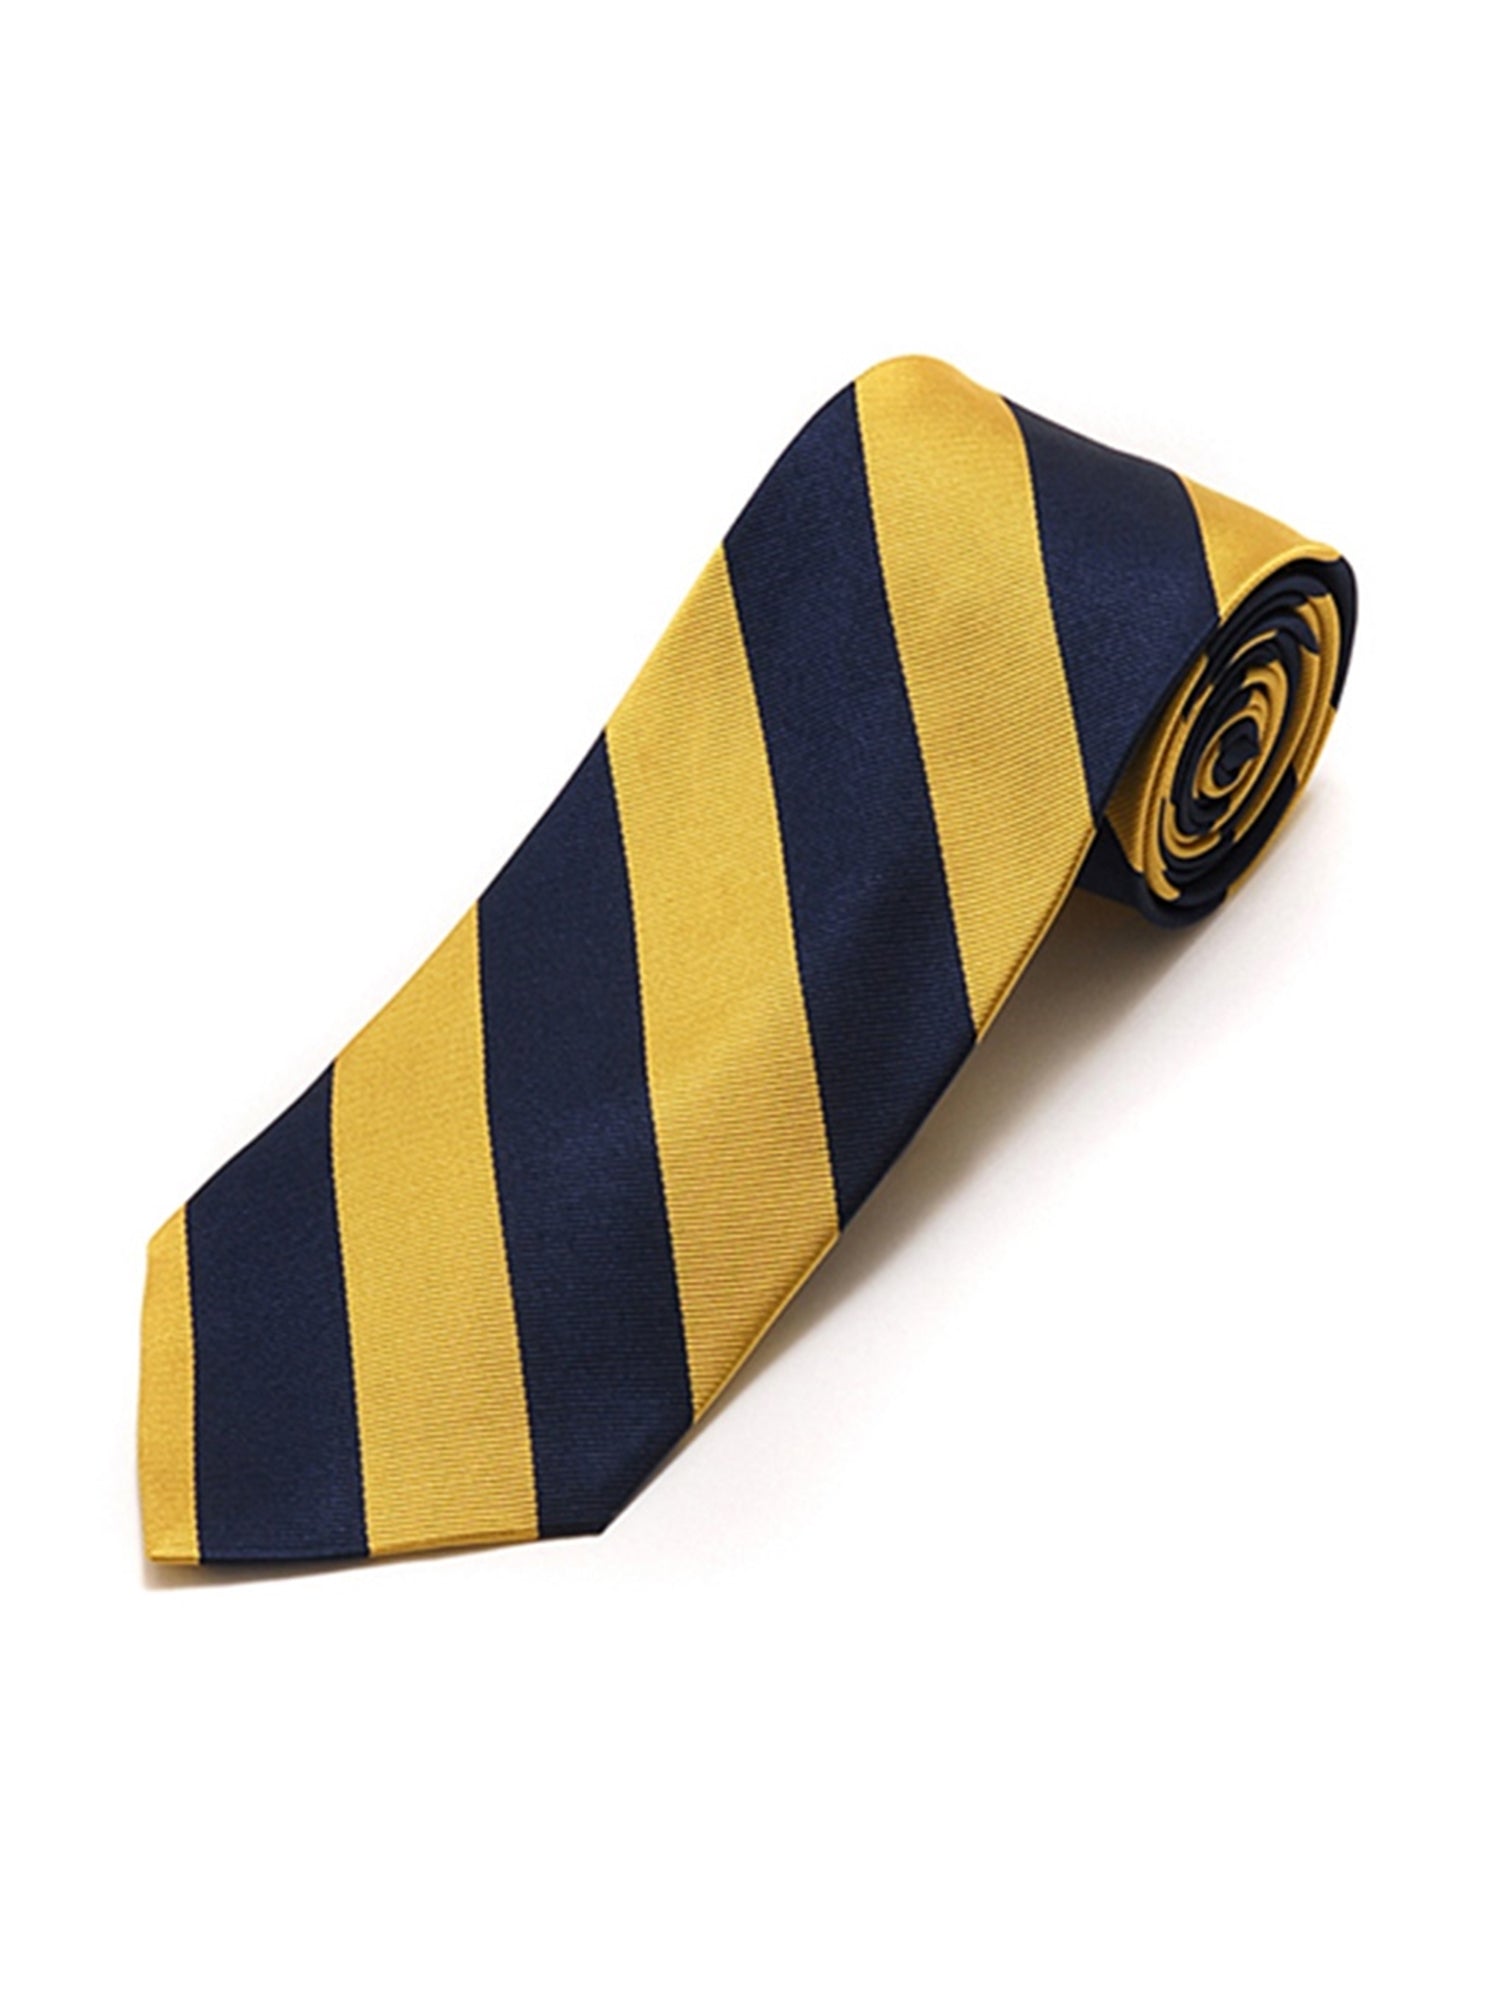 Men's College Striped Colored Silk Long Or X-Long Neck Tie Neck Tie TheDapperTie Navy & Gold 57" long & 3.25" wide 